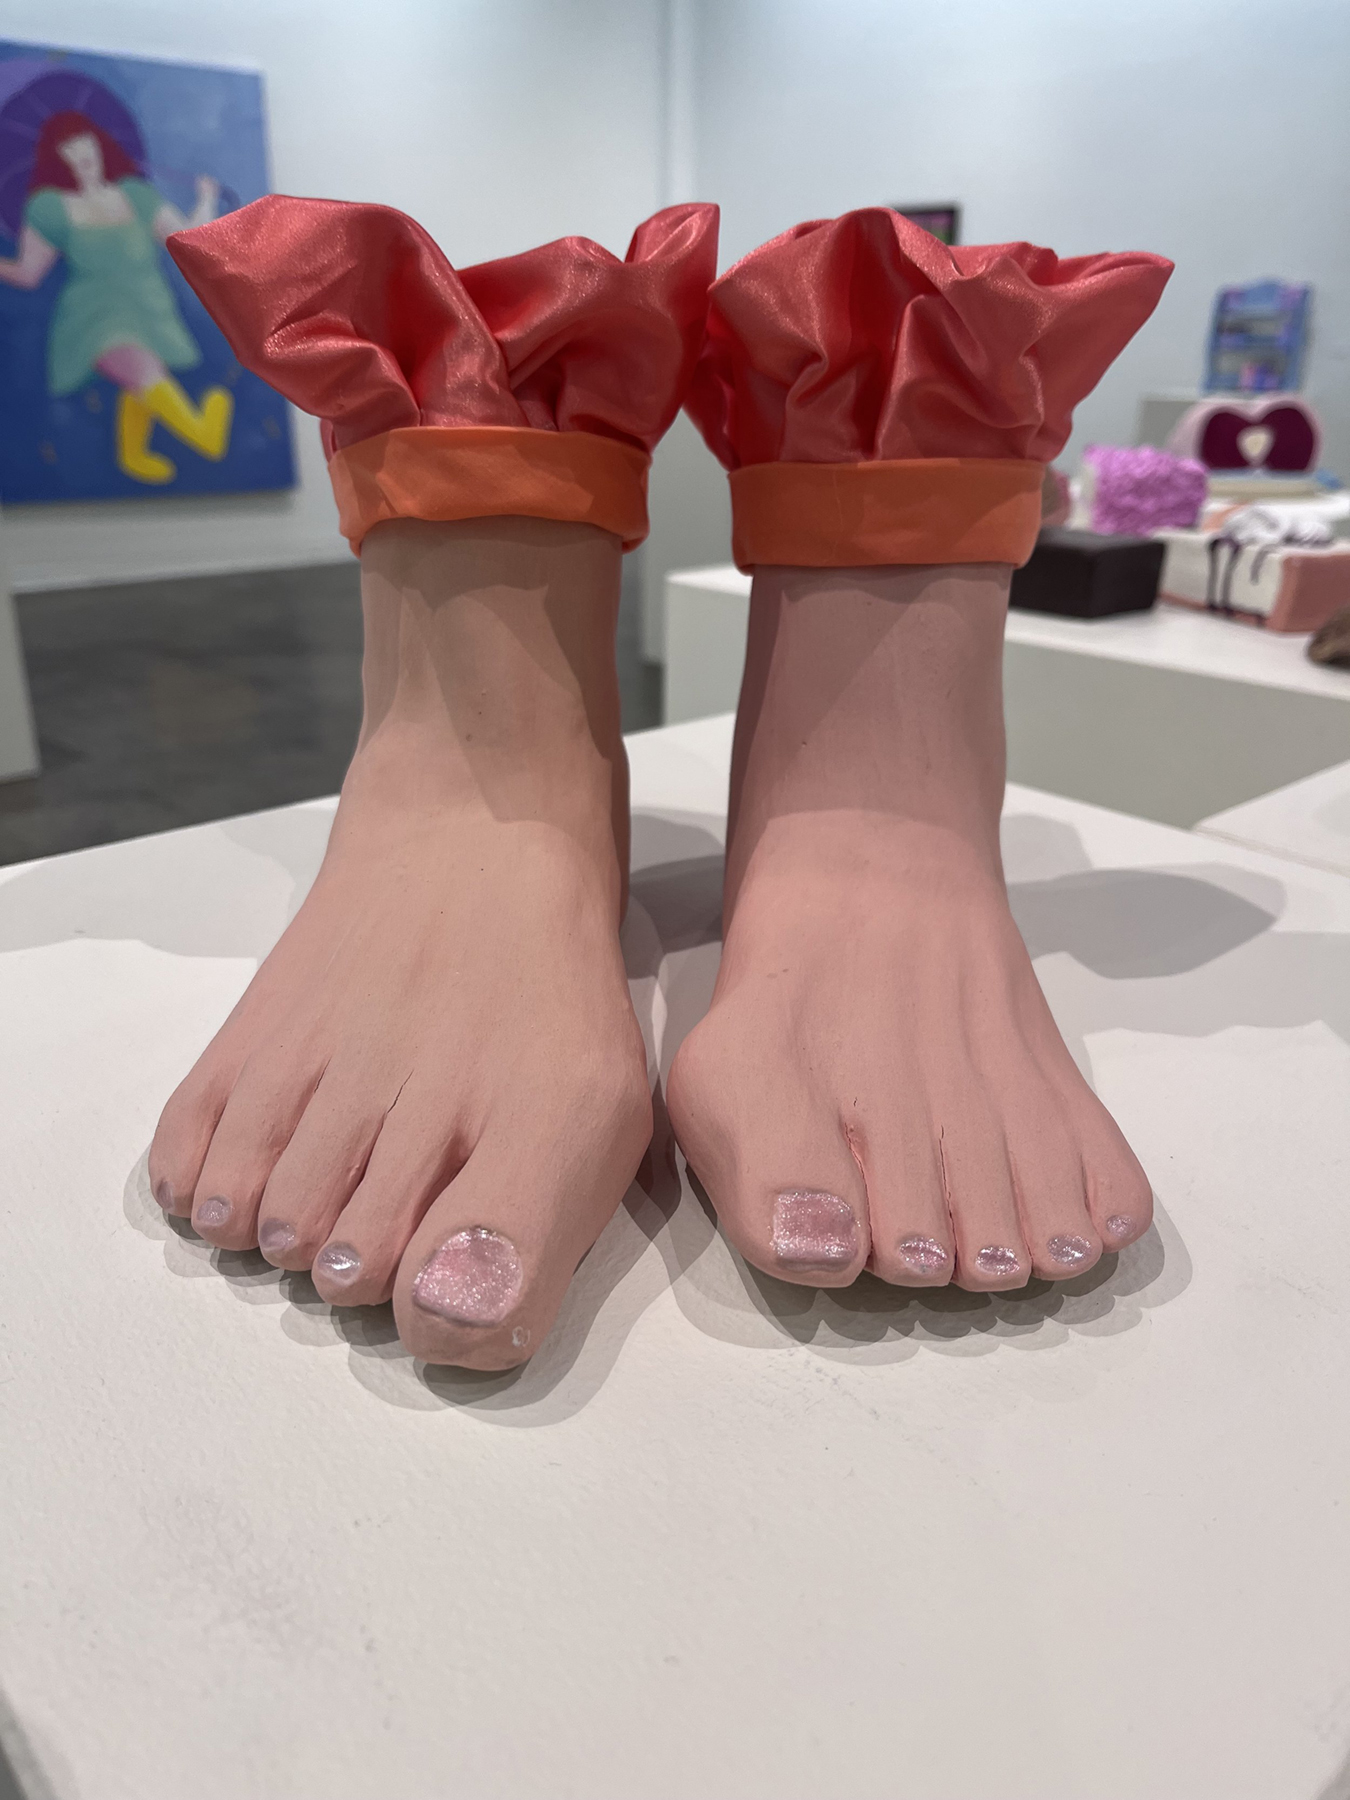 ceramic sculpture of feet by Xochitl Harbison, image courtesy of the artist